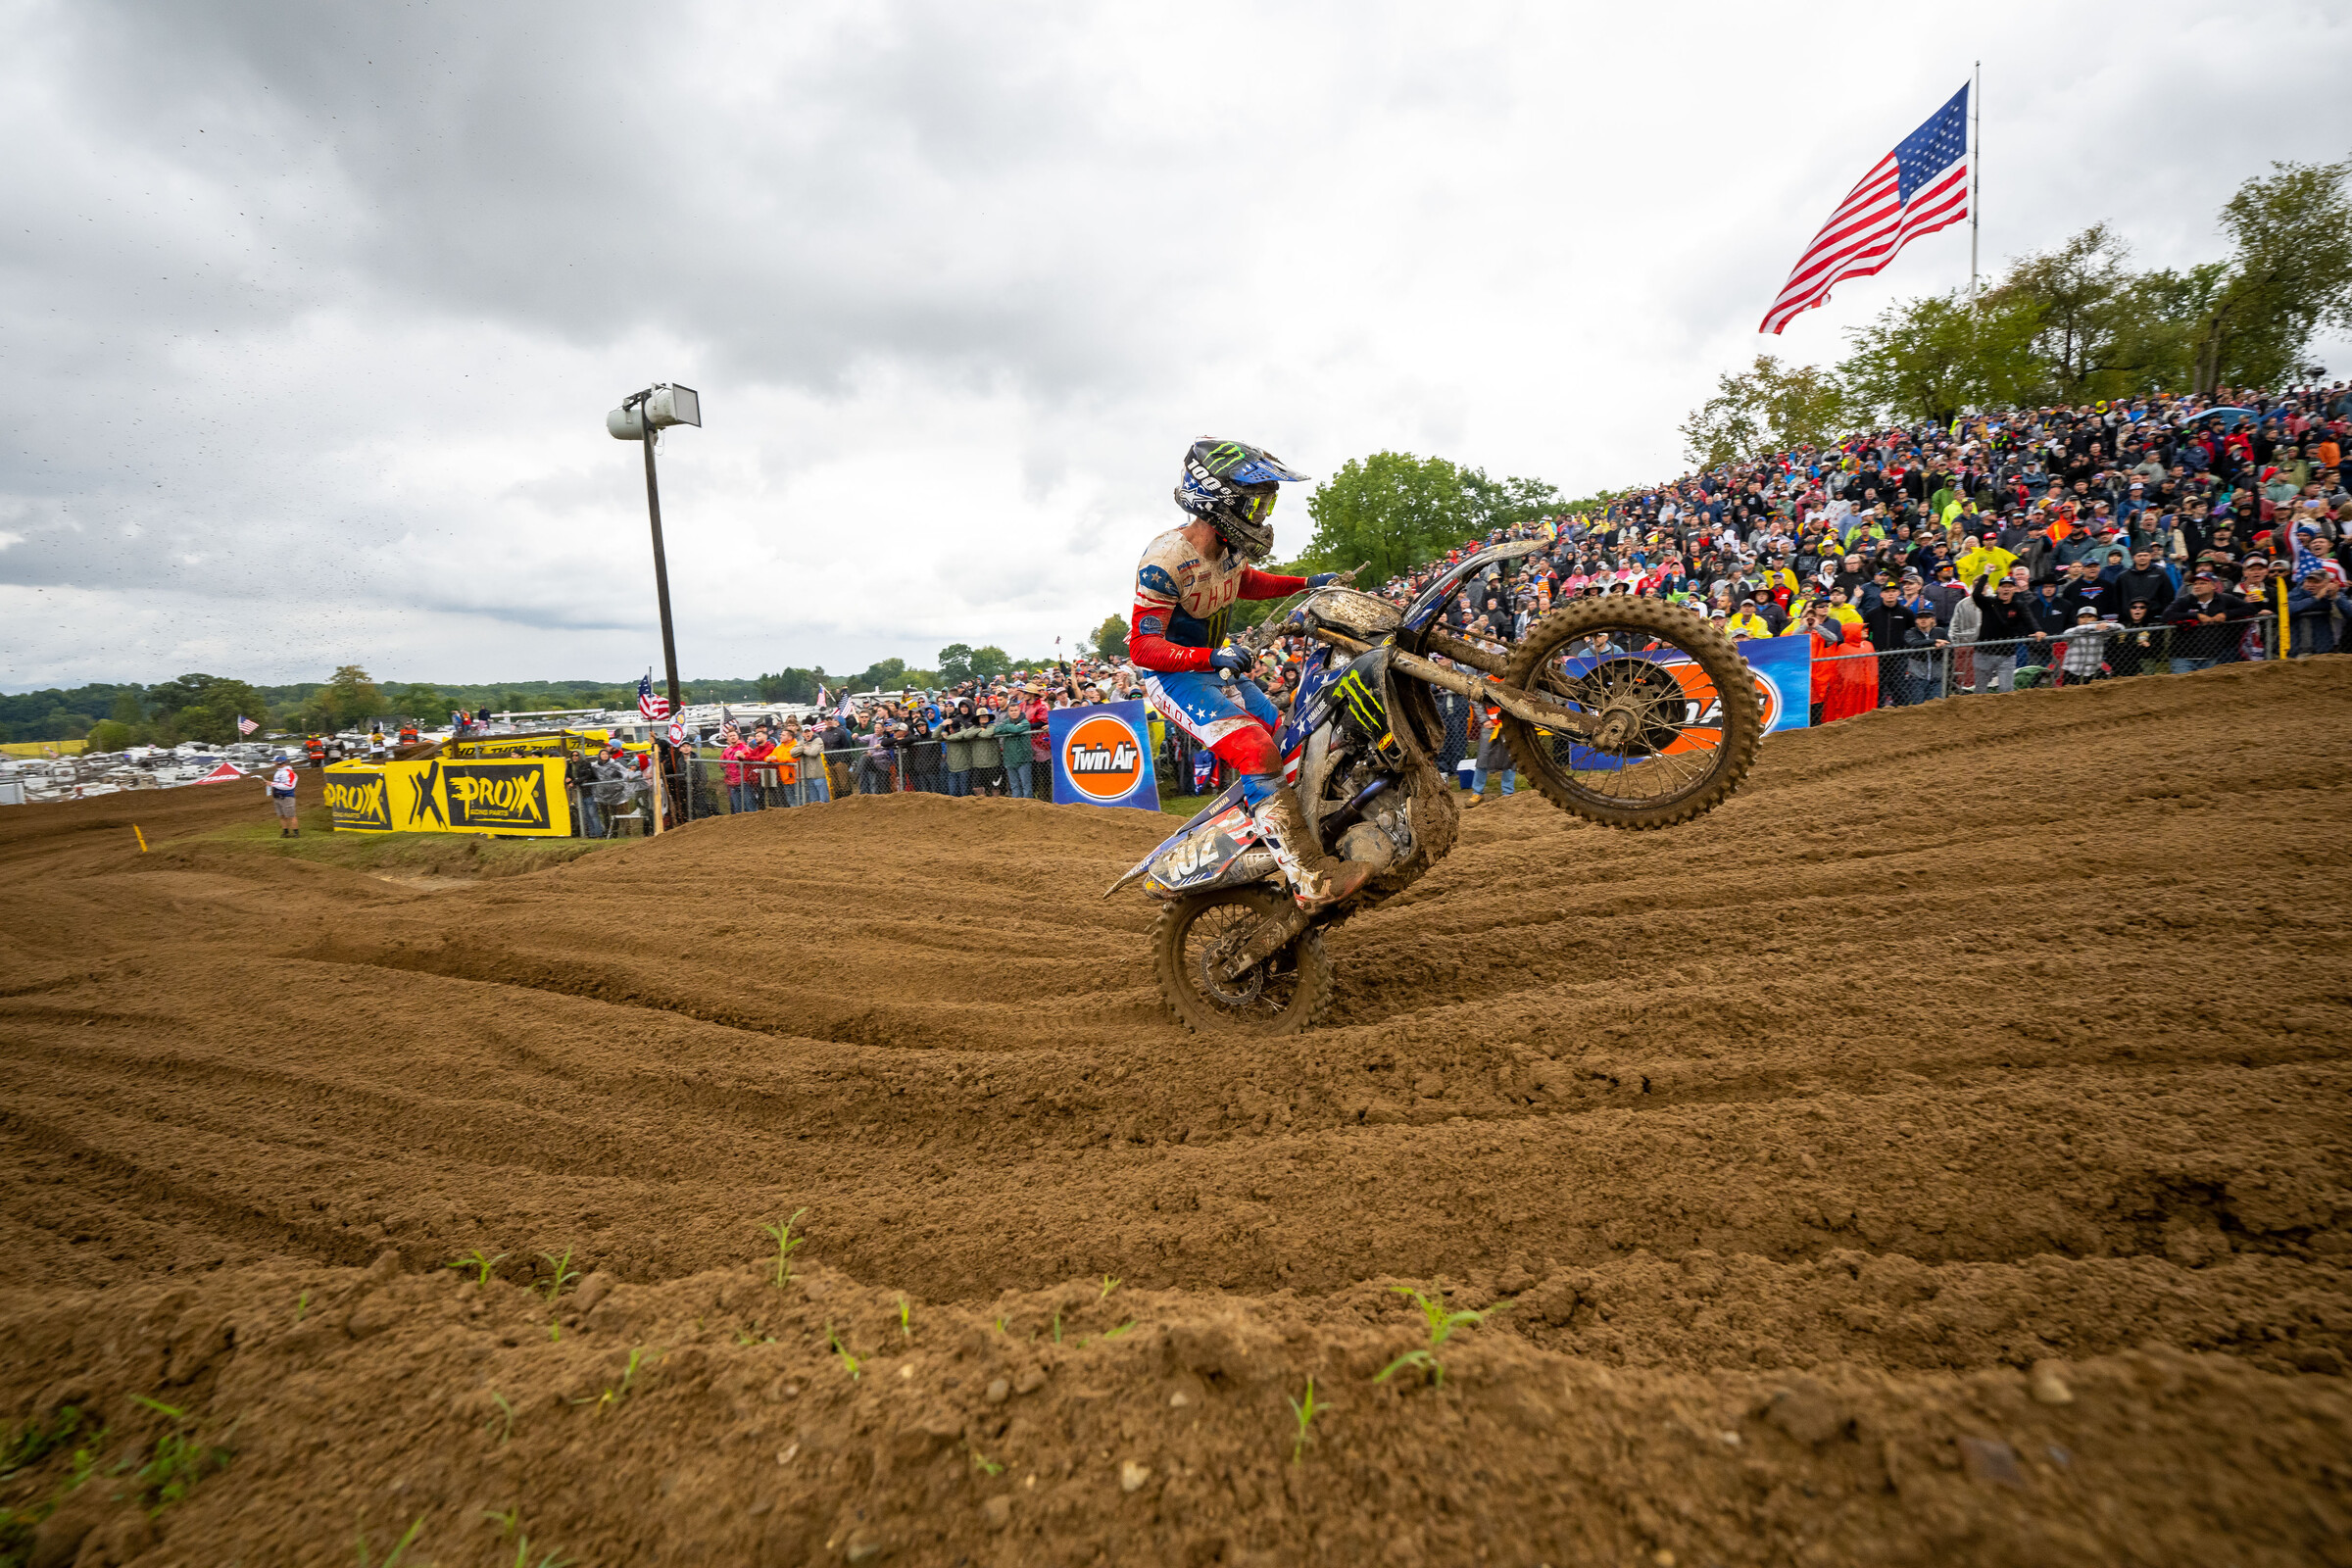 2023 Motocross of Nations Date Changed to Match with SMX Calendar